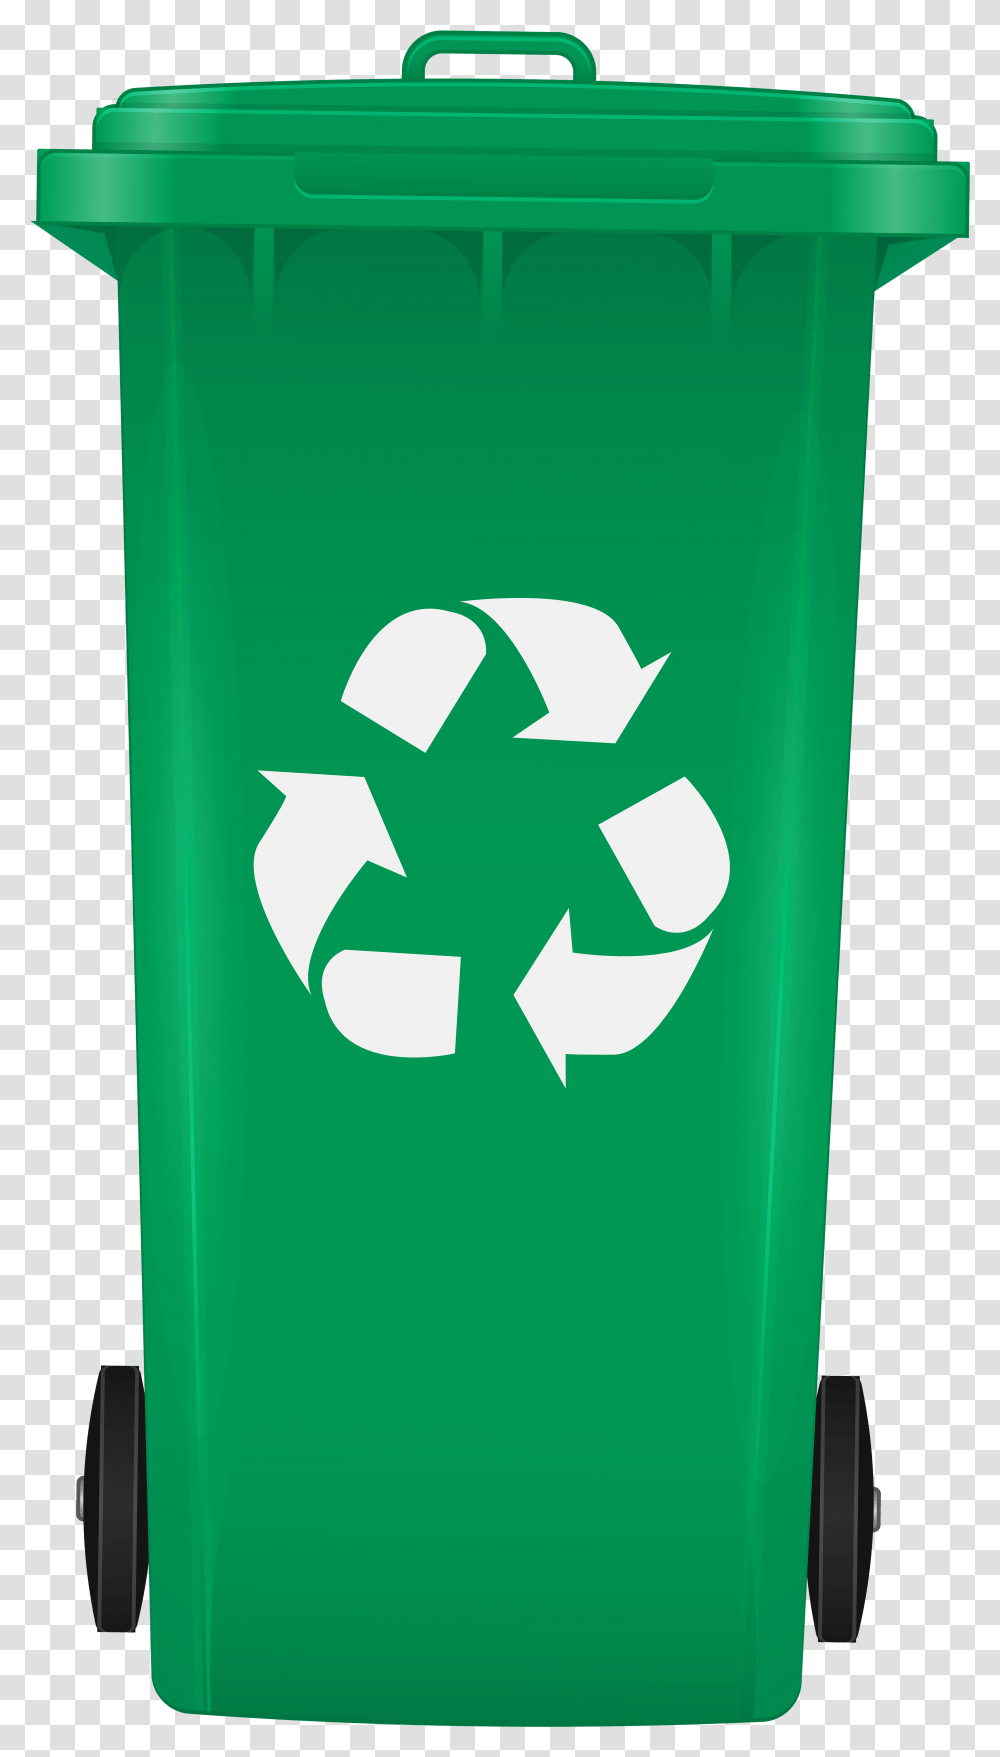 Background Recycle Bin Clipart Recycling Bin, Recycling Symbol, Green Transparent Png